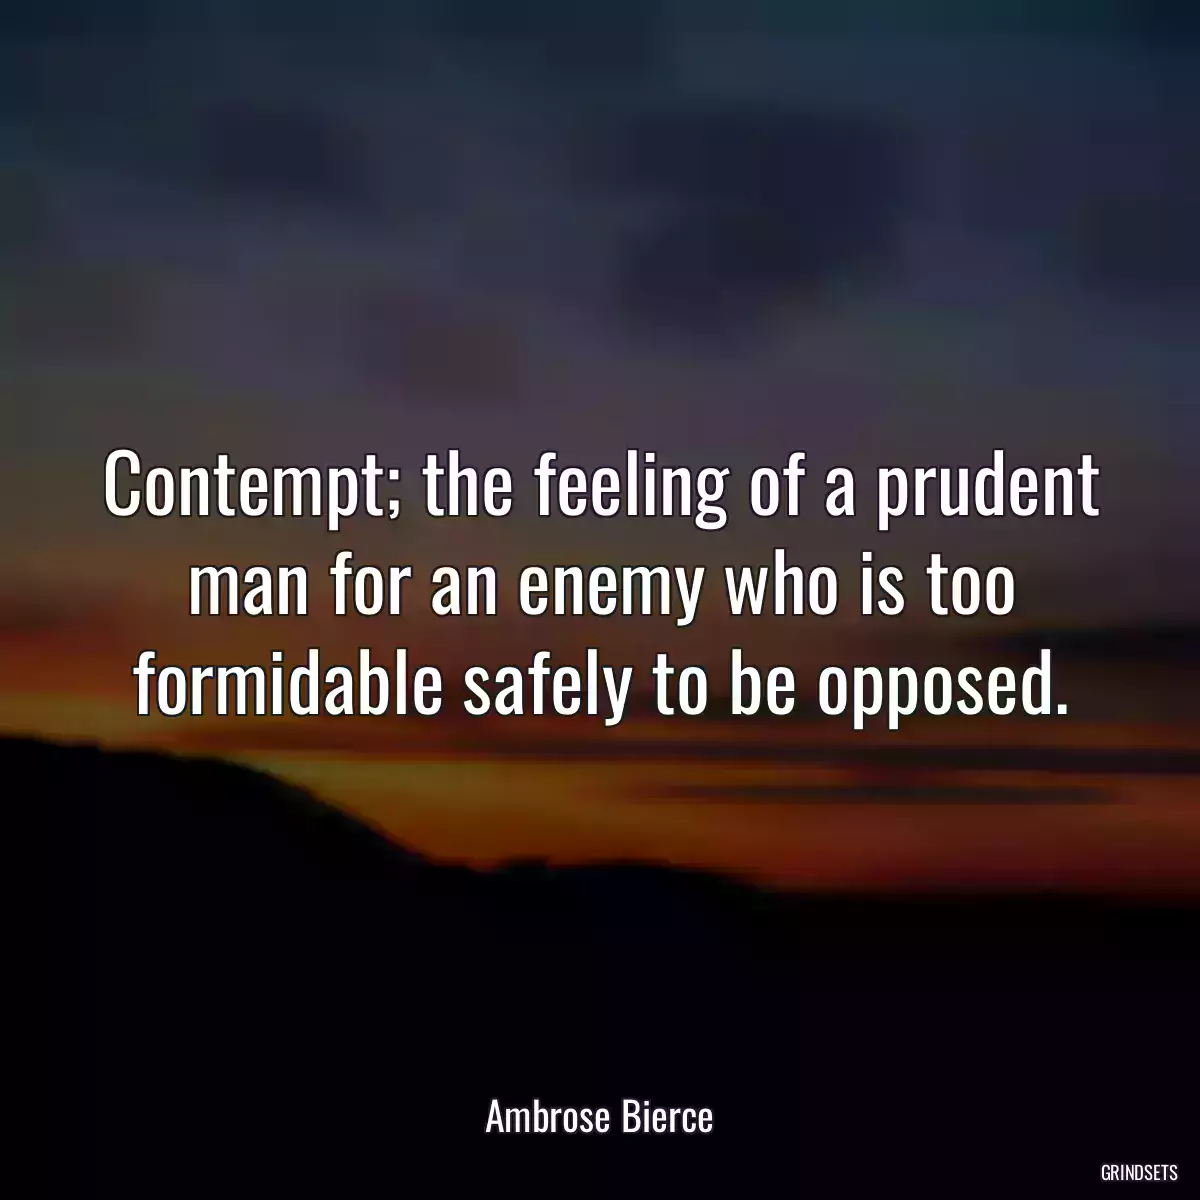 Contempt; the feeling of a prudent man for an enemy who is too formidable safely to be opposed.